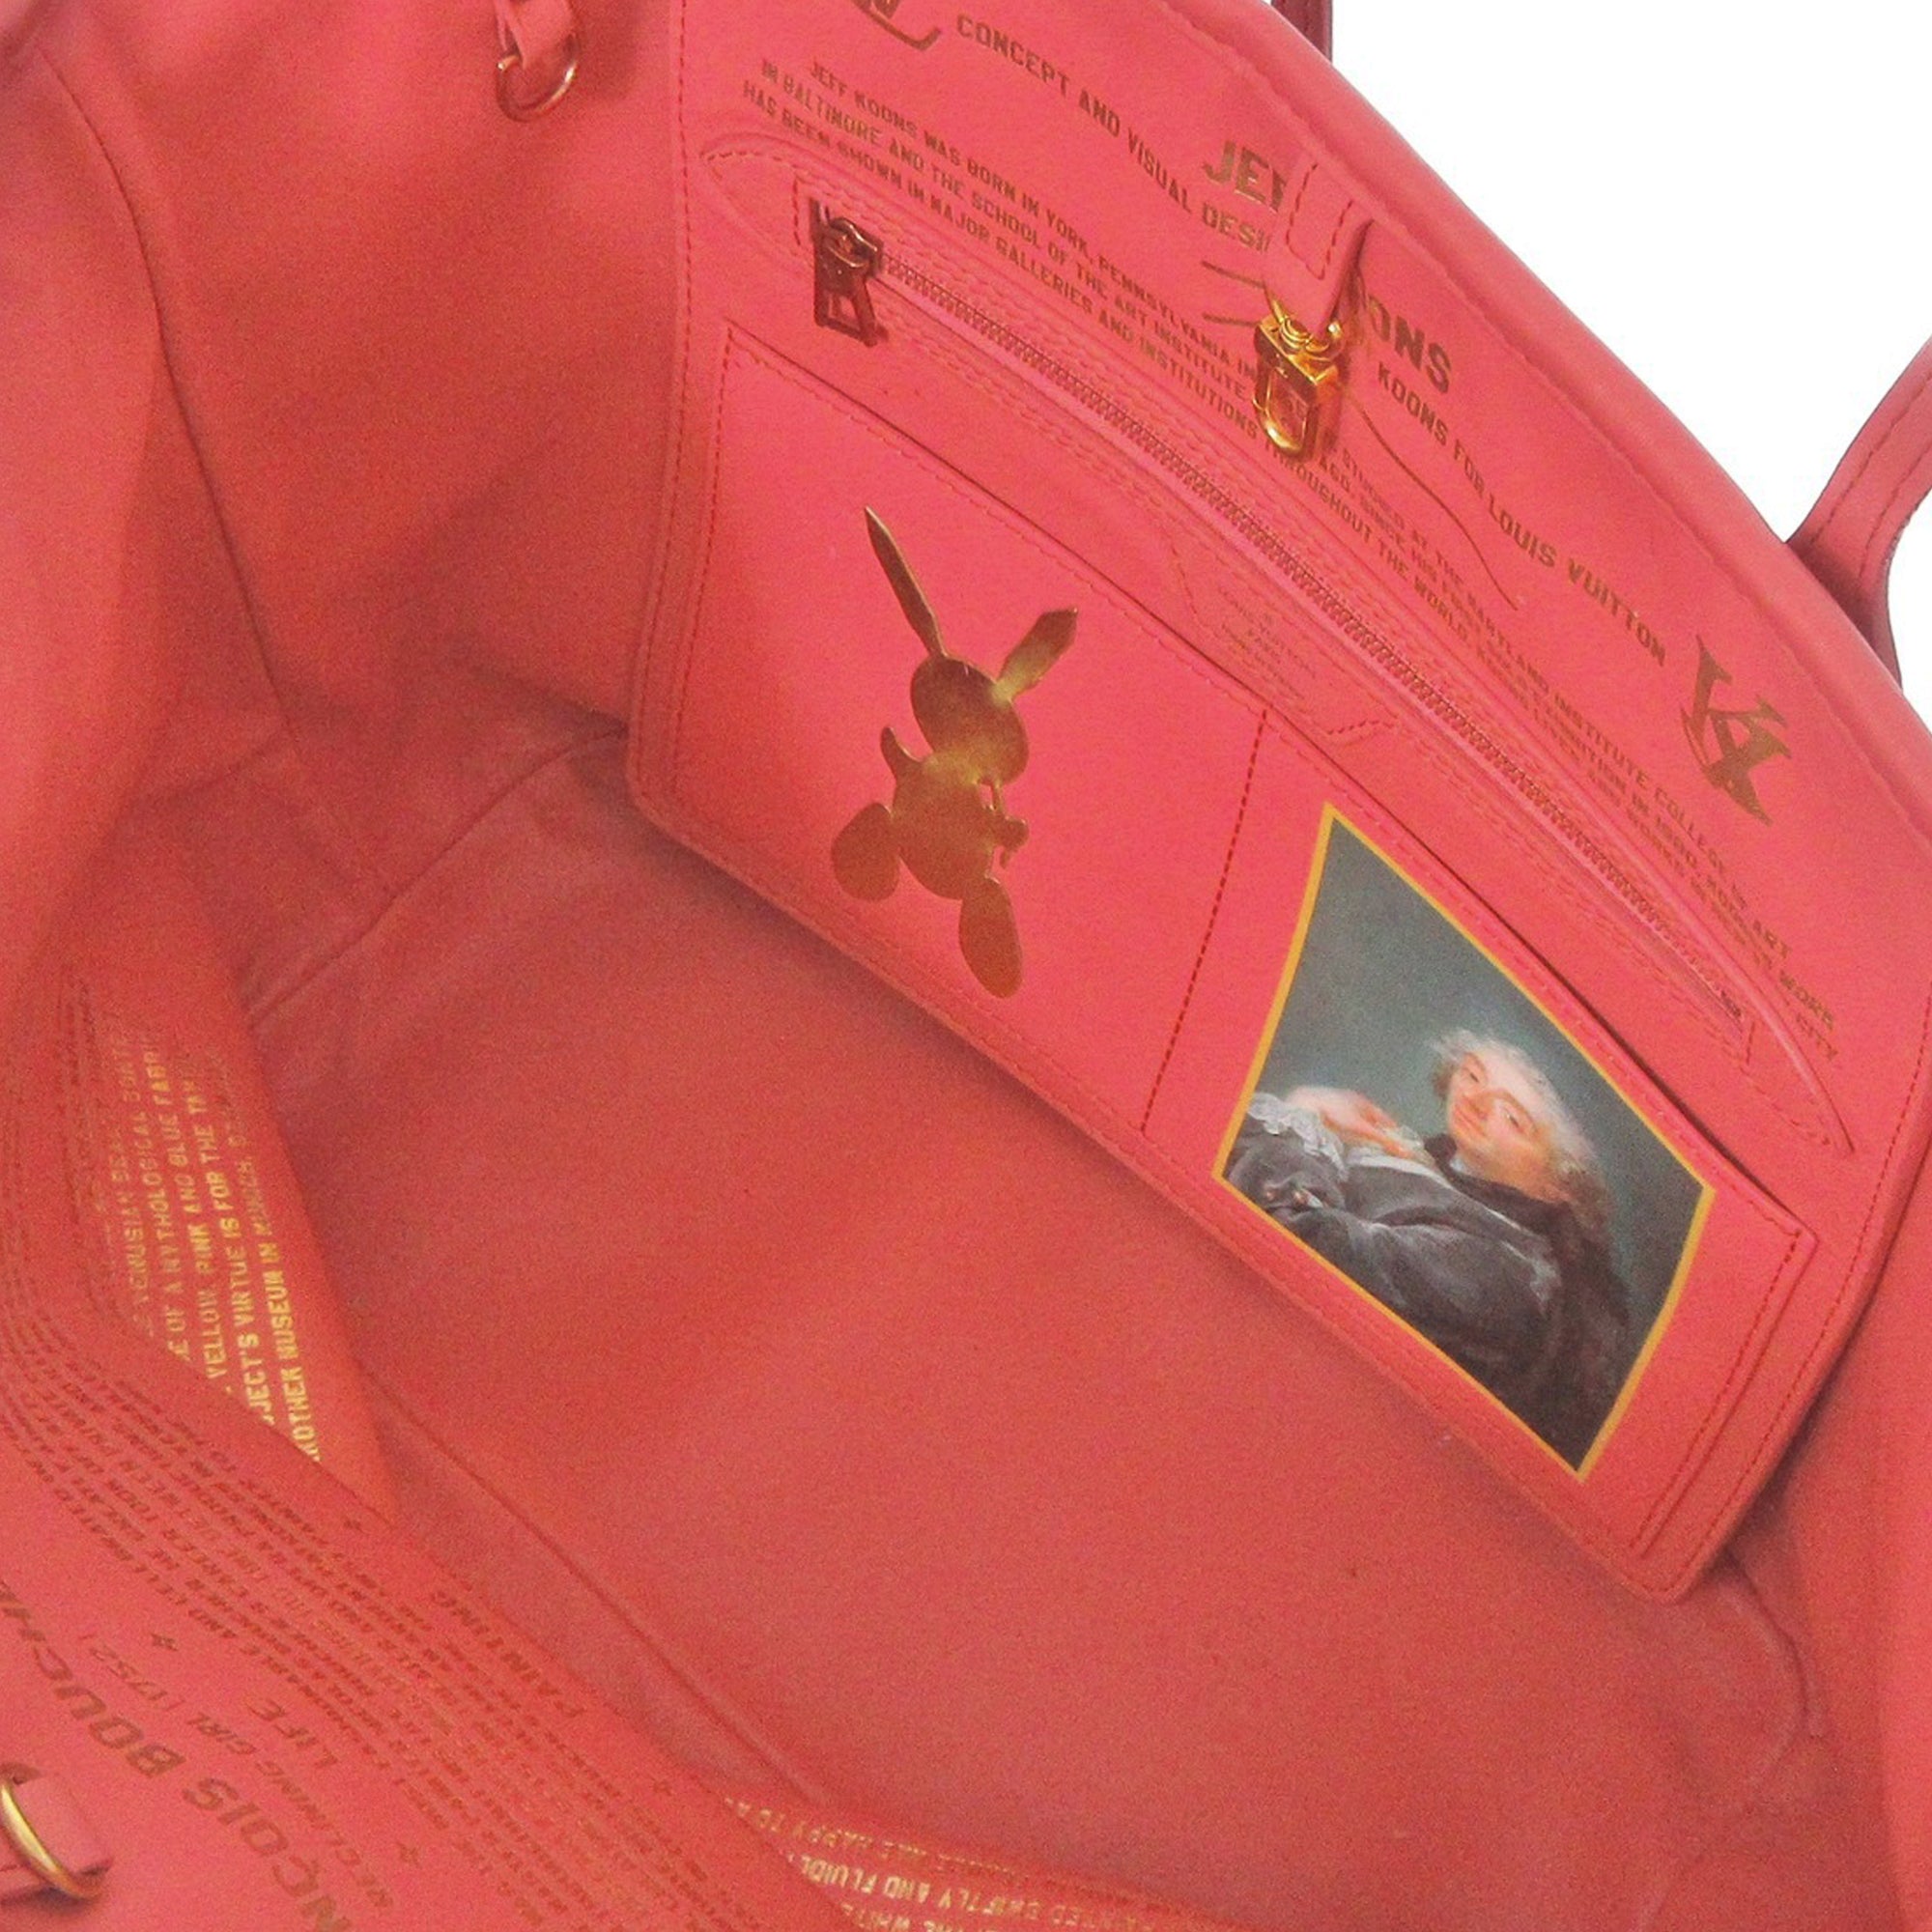 Limited Edition Louis Vuitton Neverfull MM 2017 Masters Collection Jeff Koons Boucher Bag WDG8346 040323 - $400 OFF EARTH DAY